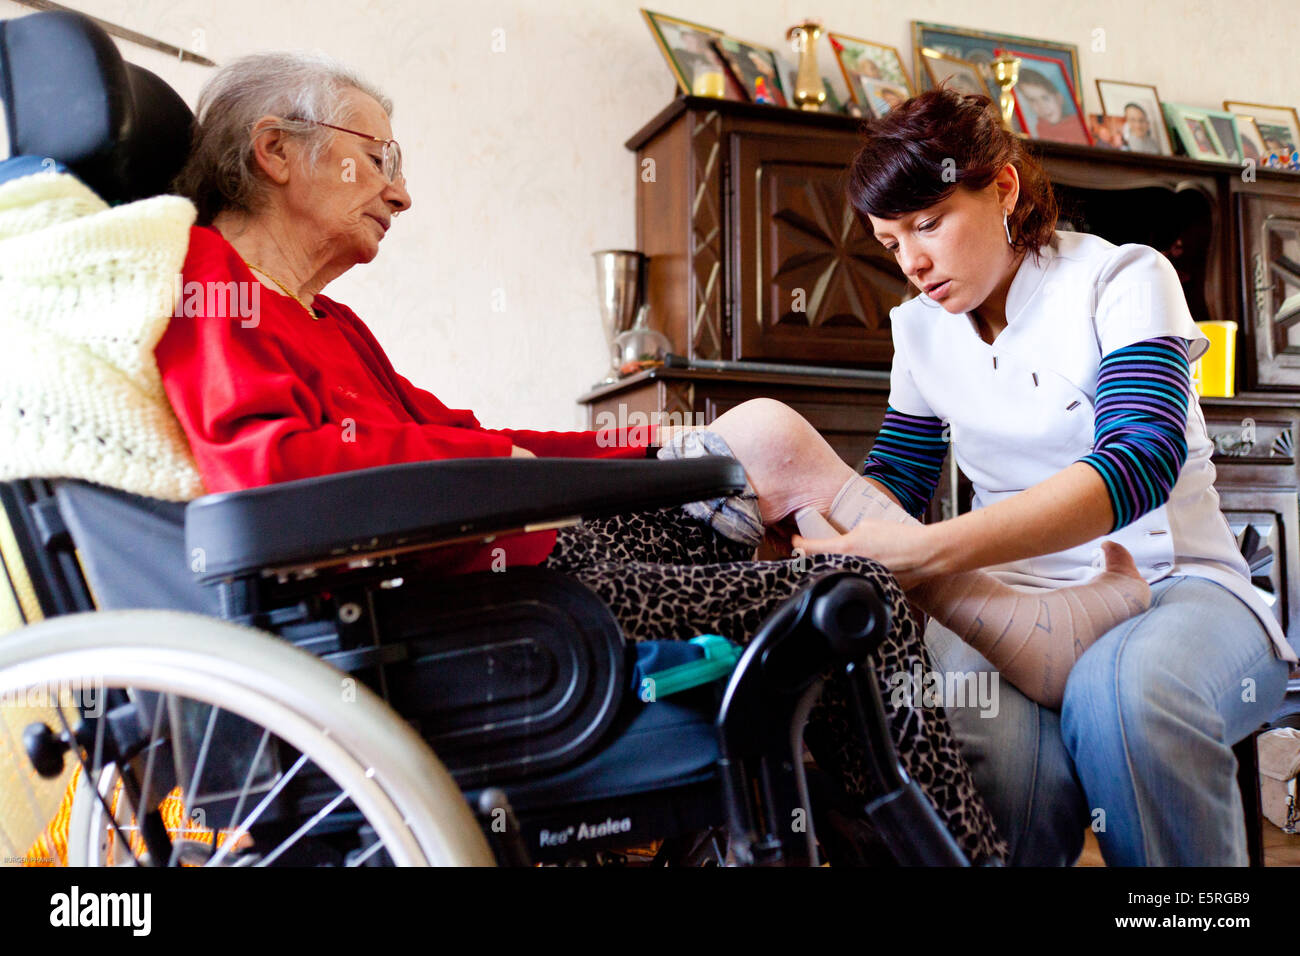 Physiotherapy session at the home of an elderly woman with a disability. Stock Photo